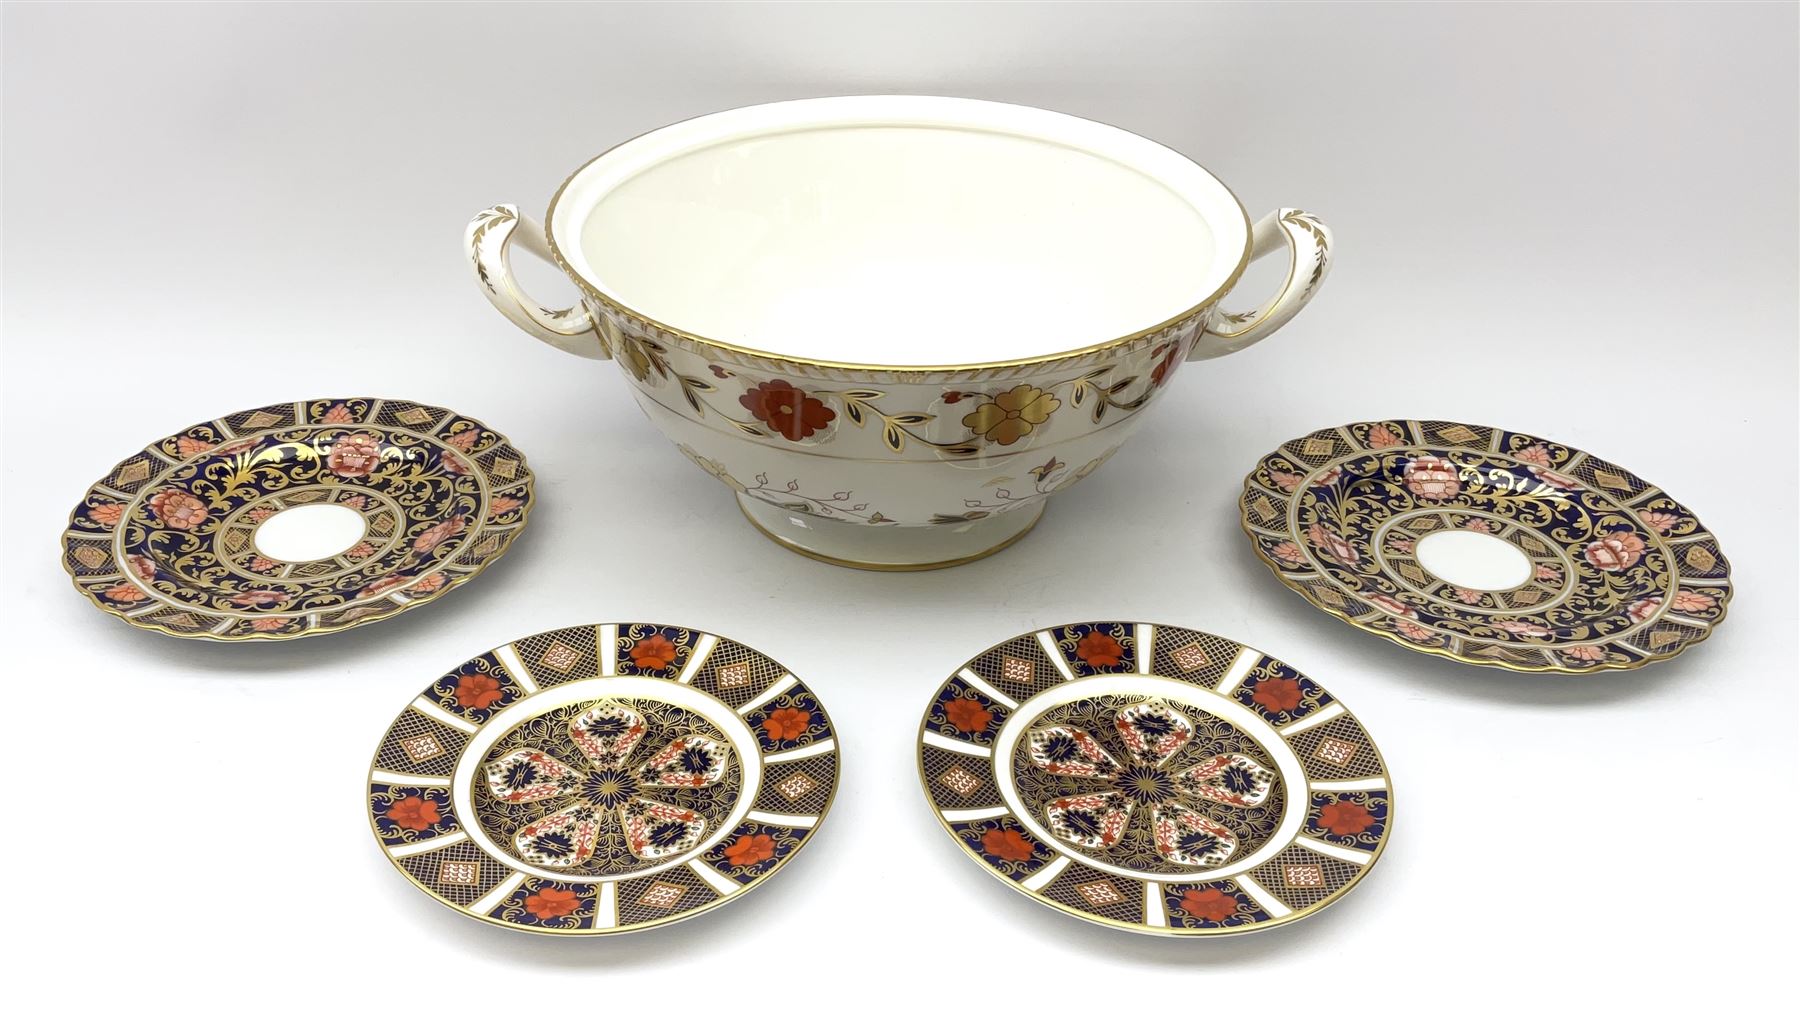 A pair of early 19th century Spode Imari 1823 pattern plates